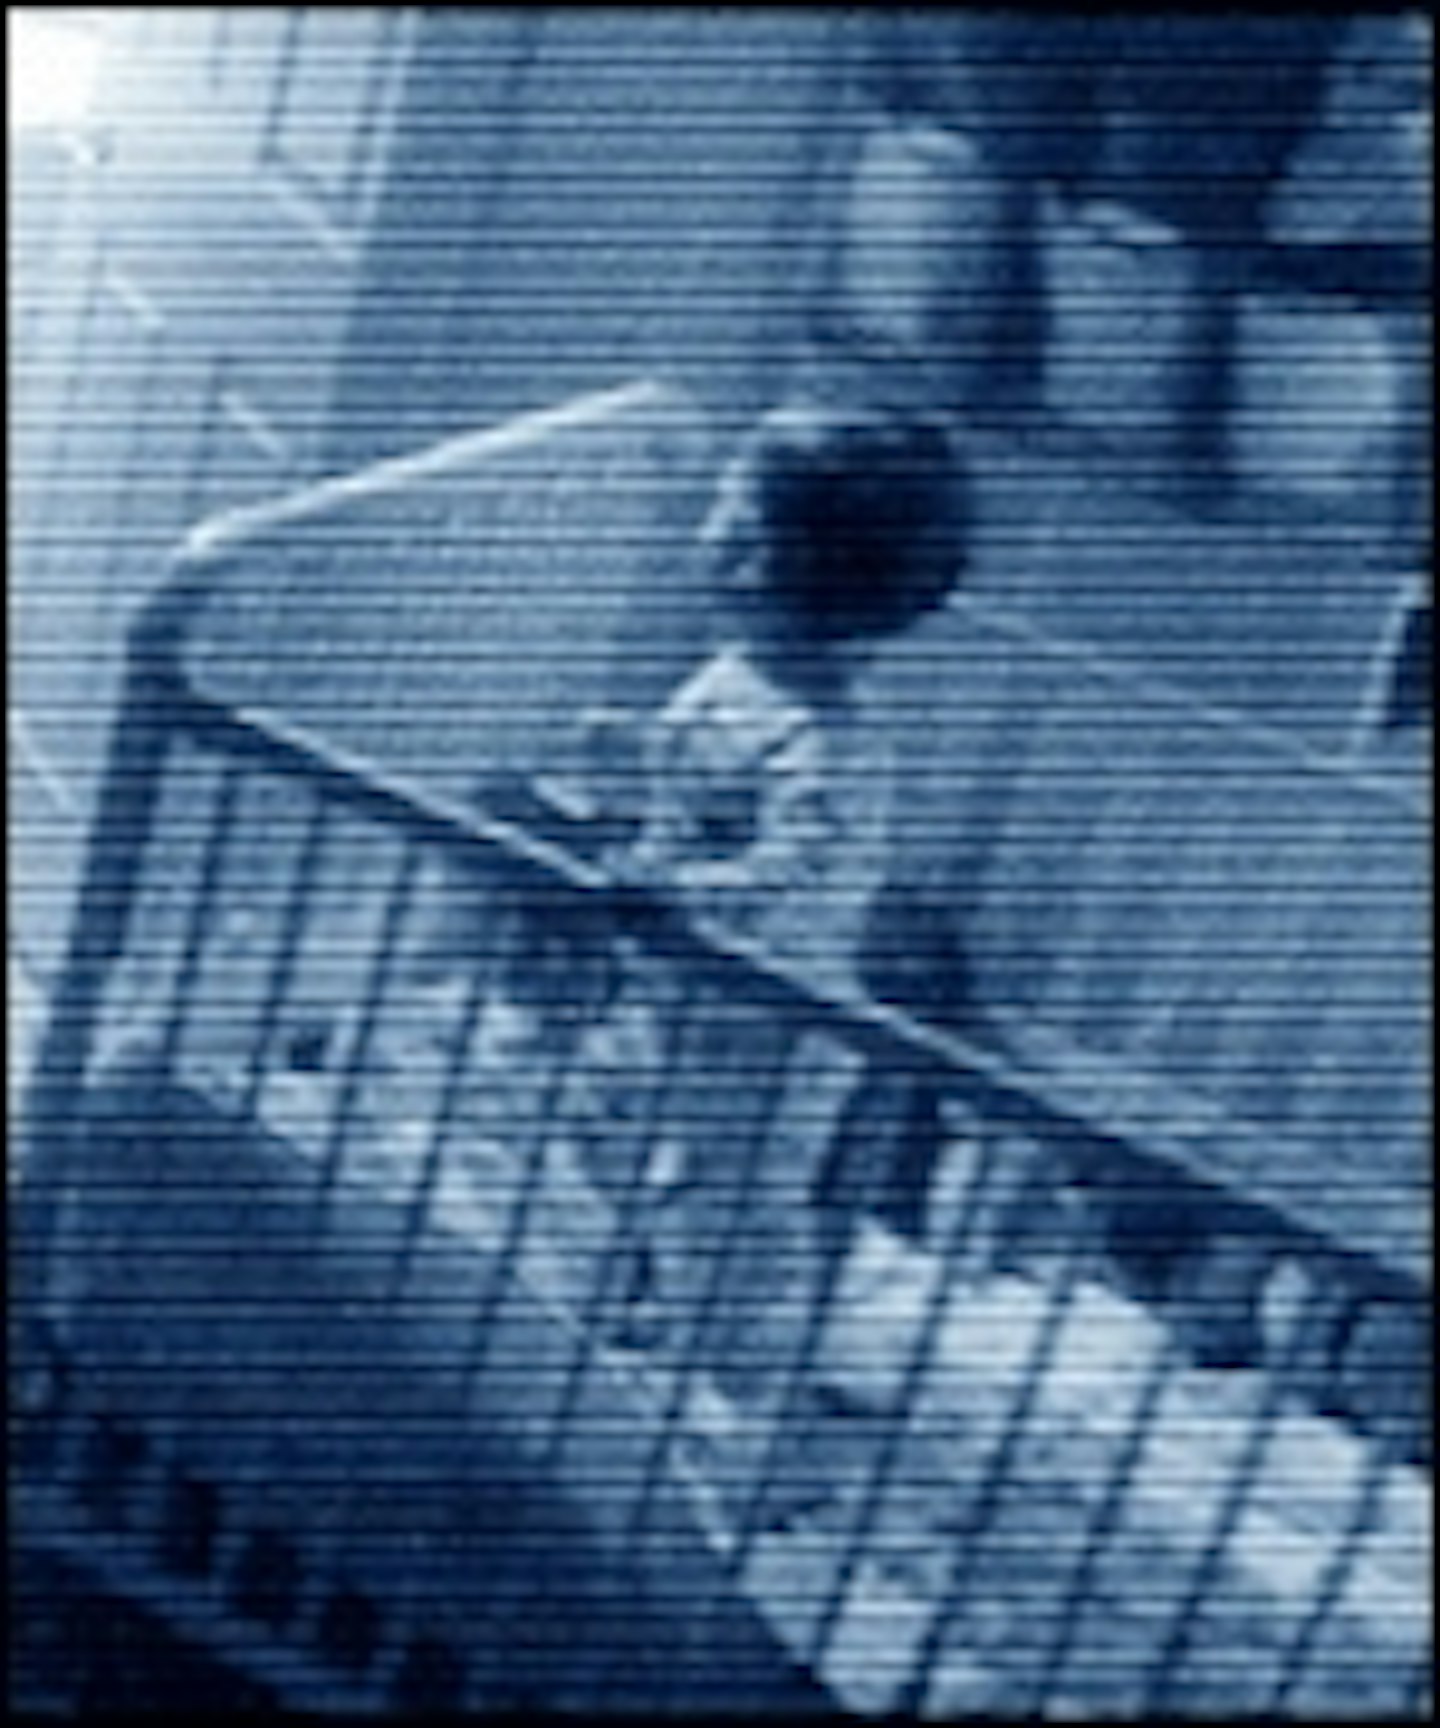 Exclusive Paranormal Activity 2 Poster